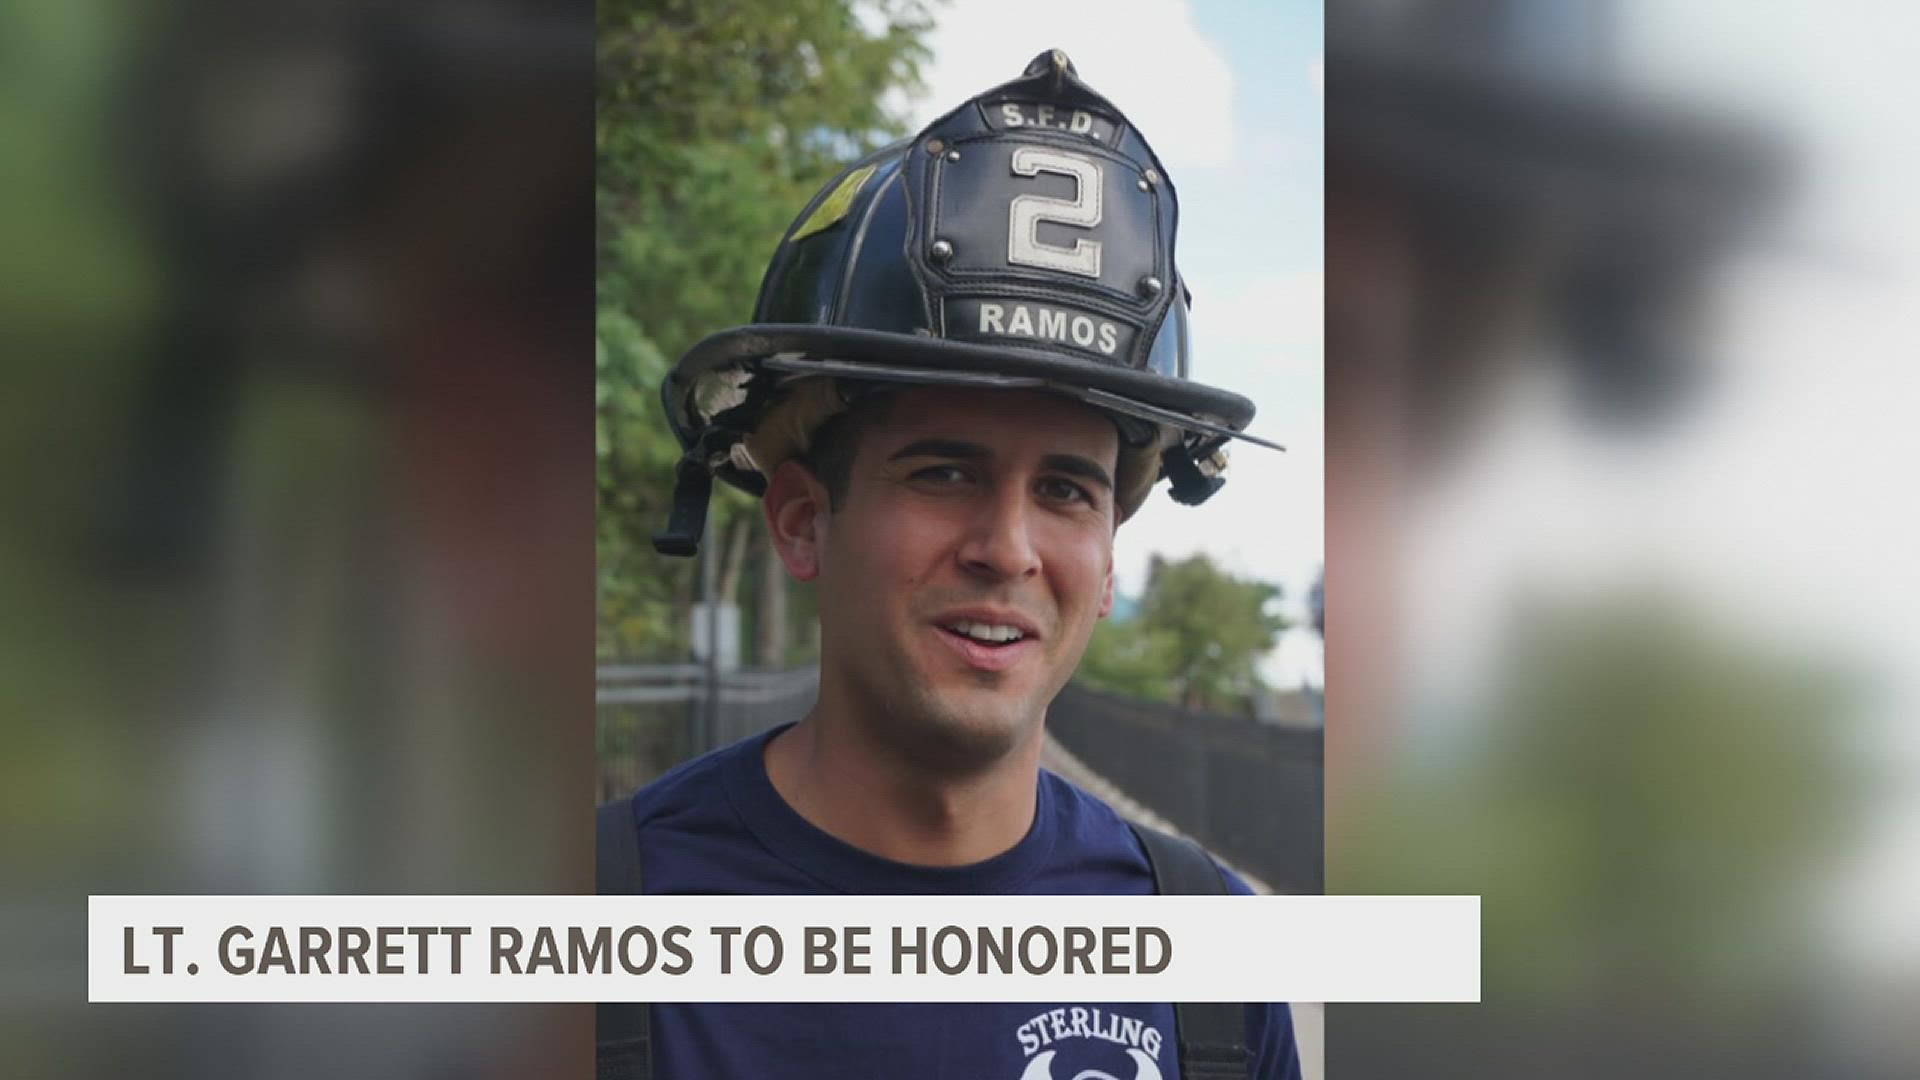 Ramos died in December 2021 after a floor collapsed beneath him while he was fighting a fire in Rock Falls.